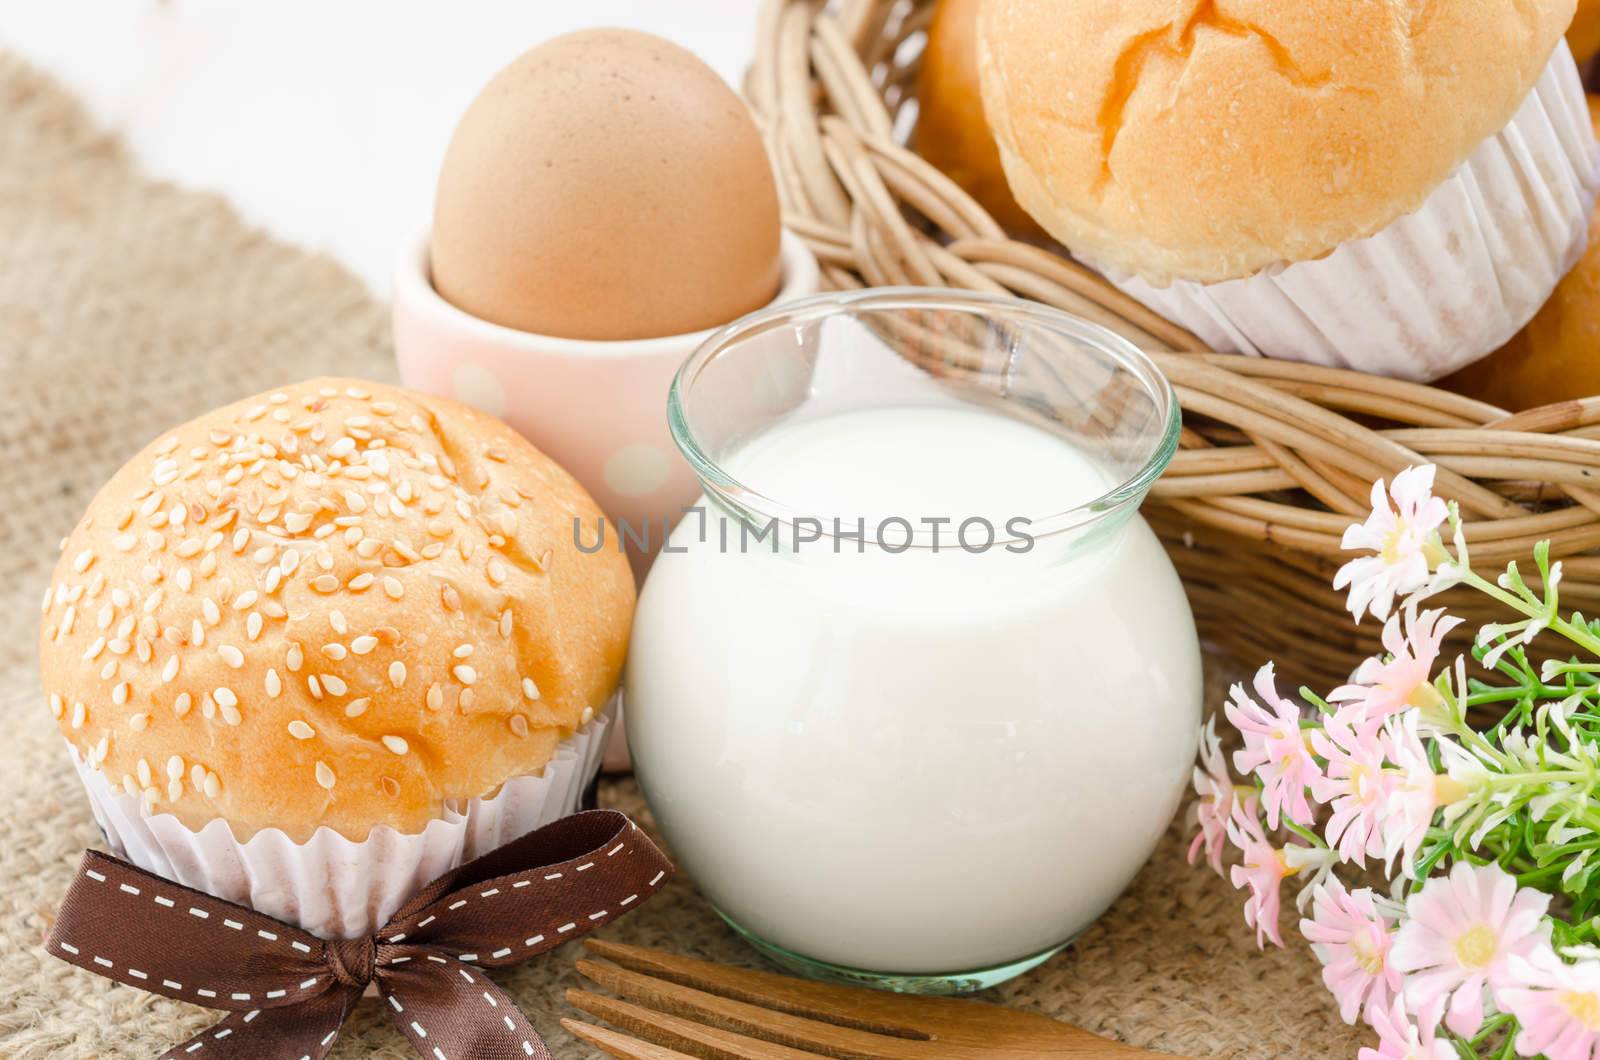 bread bun with white sesame and milk on sack background.